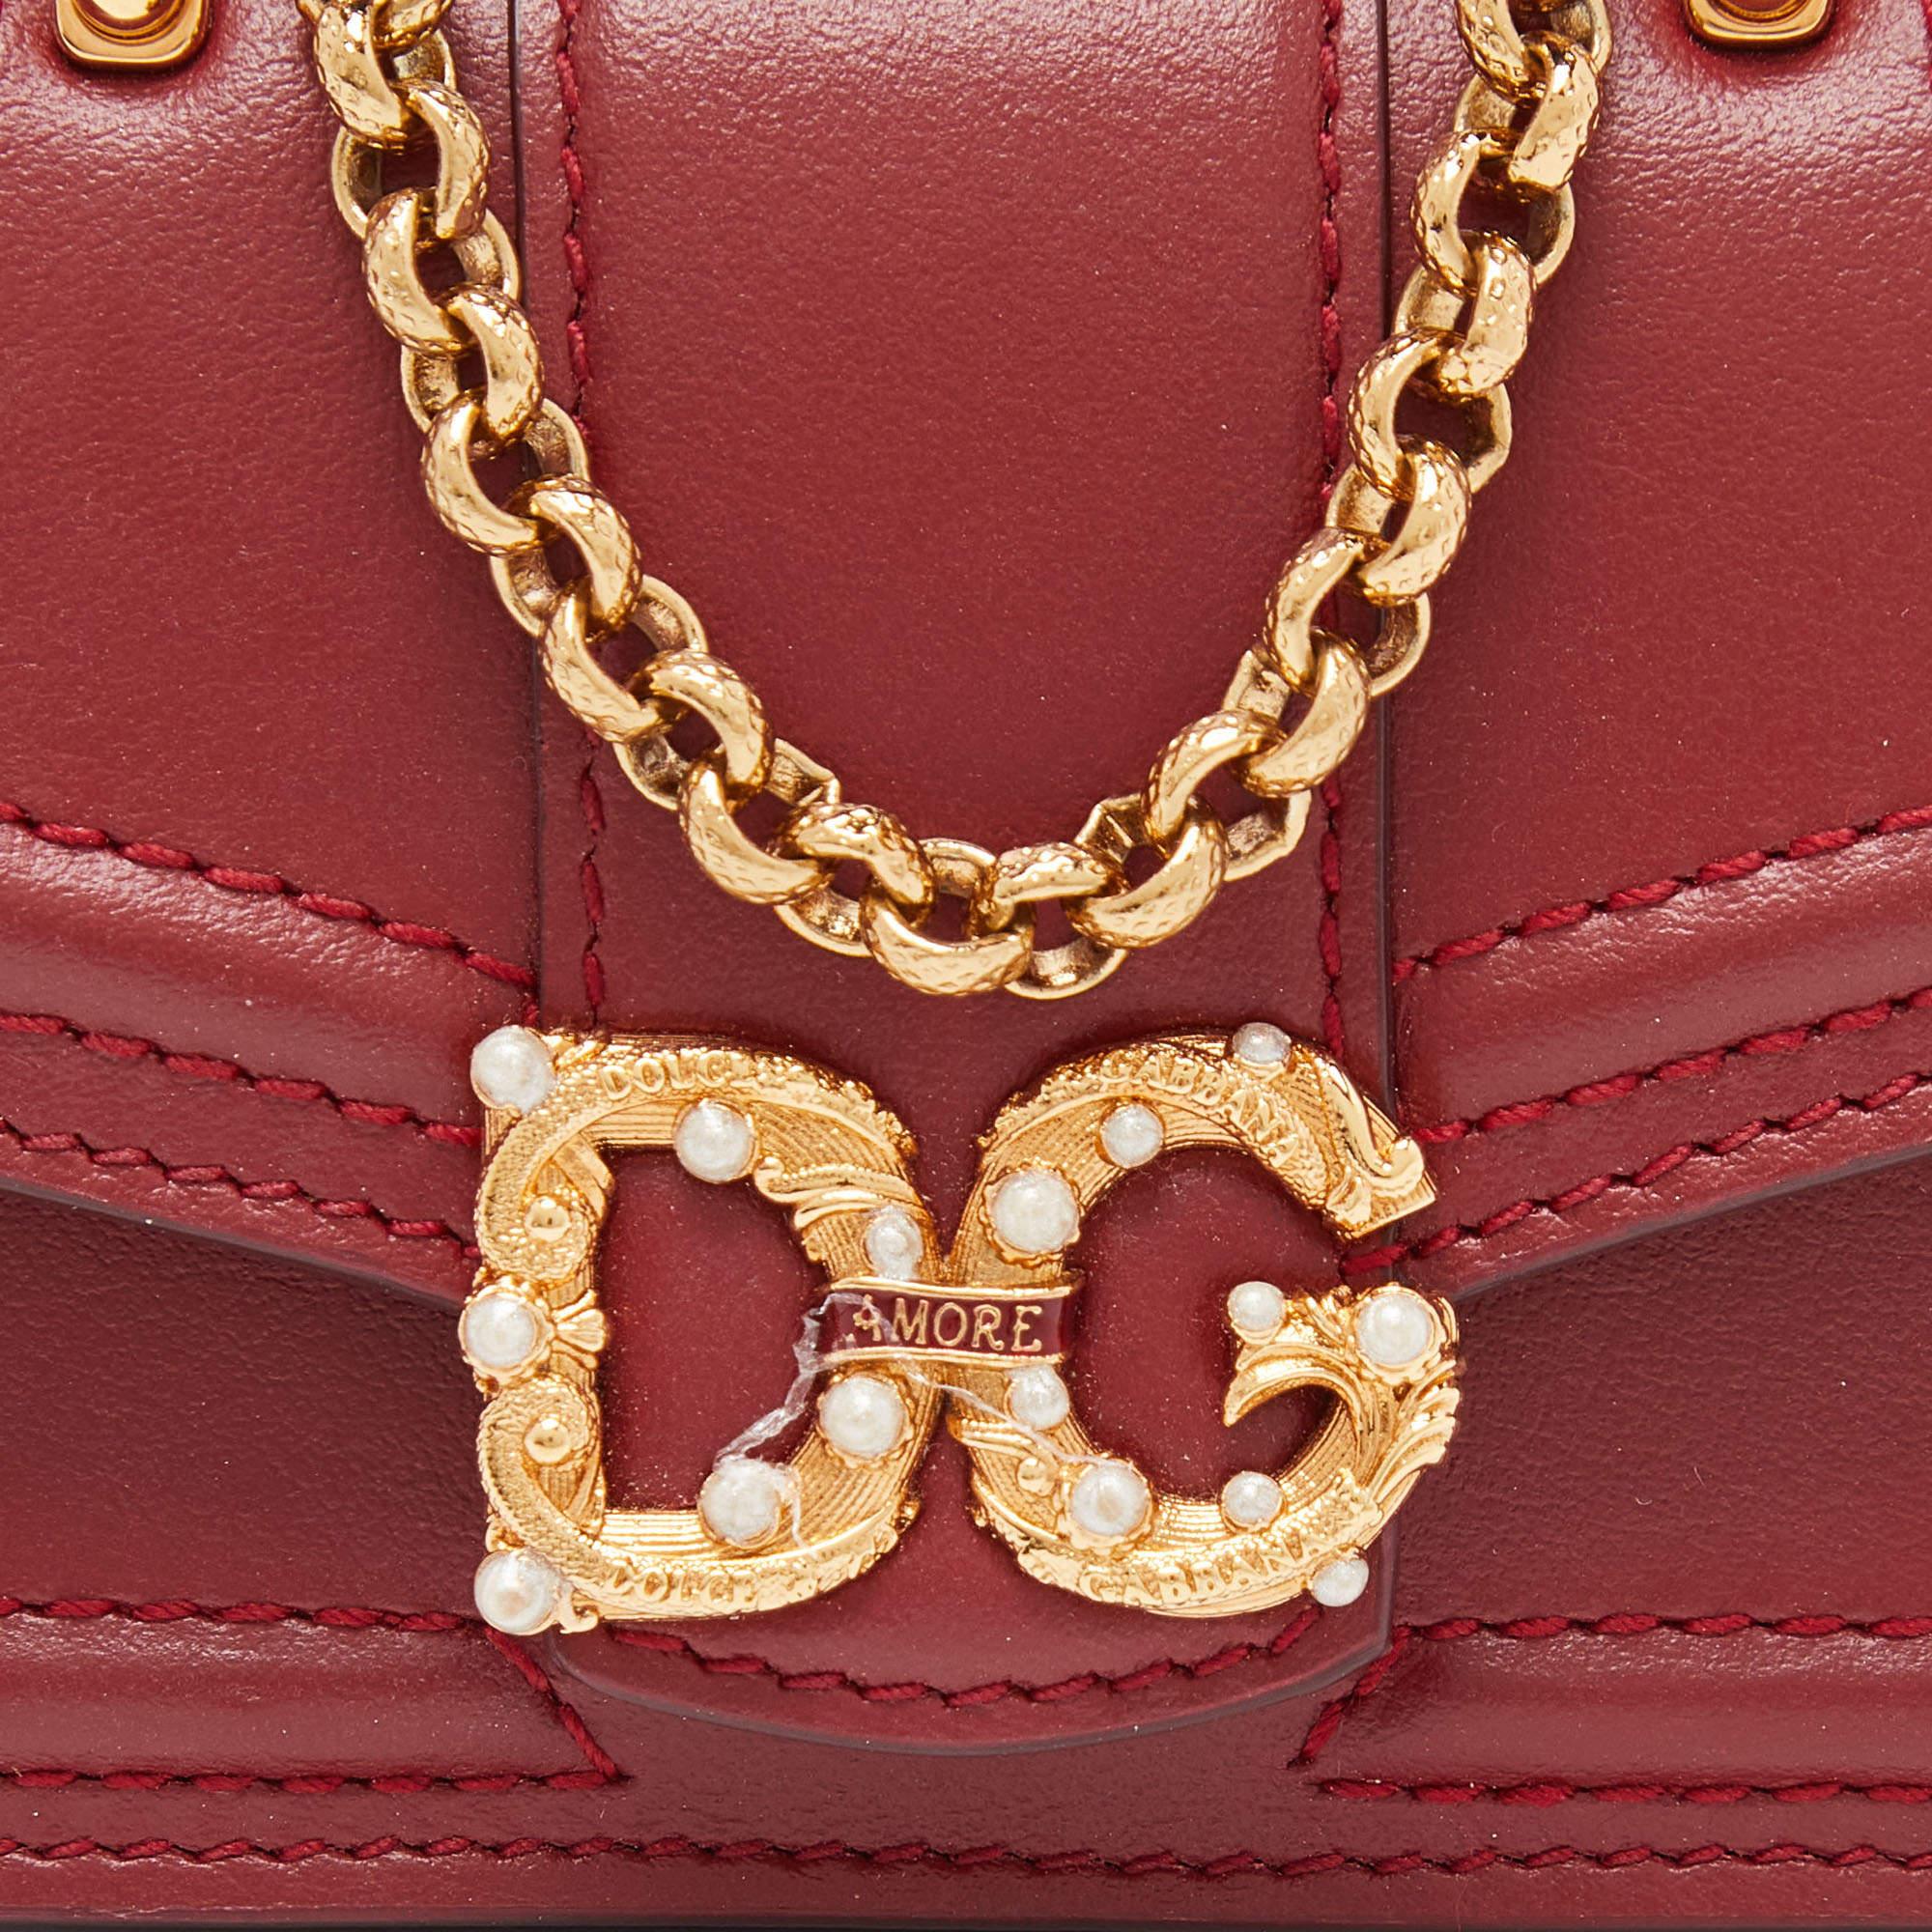 Dolce & Gabbana Red Leather DG Amore Chain Purse 2